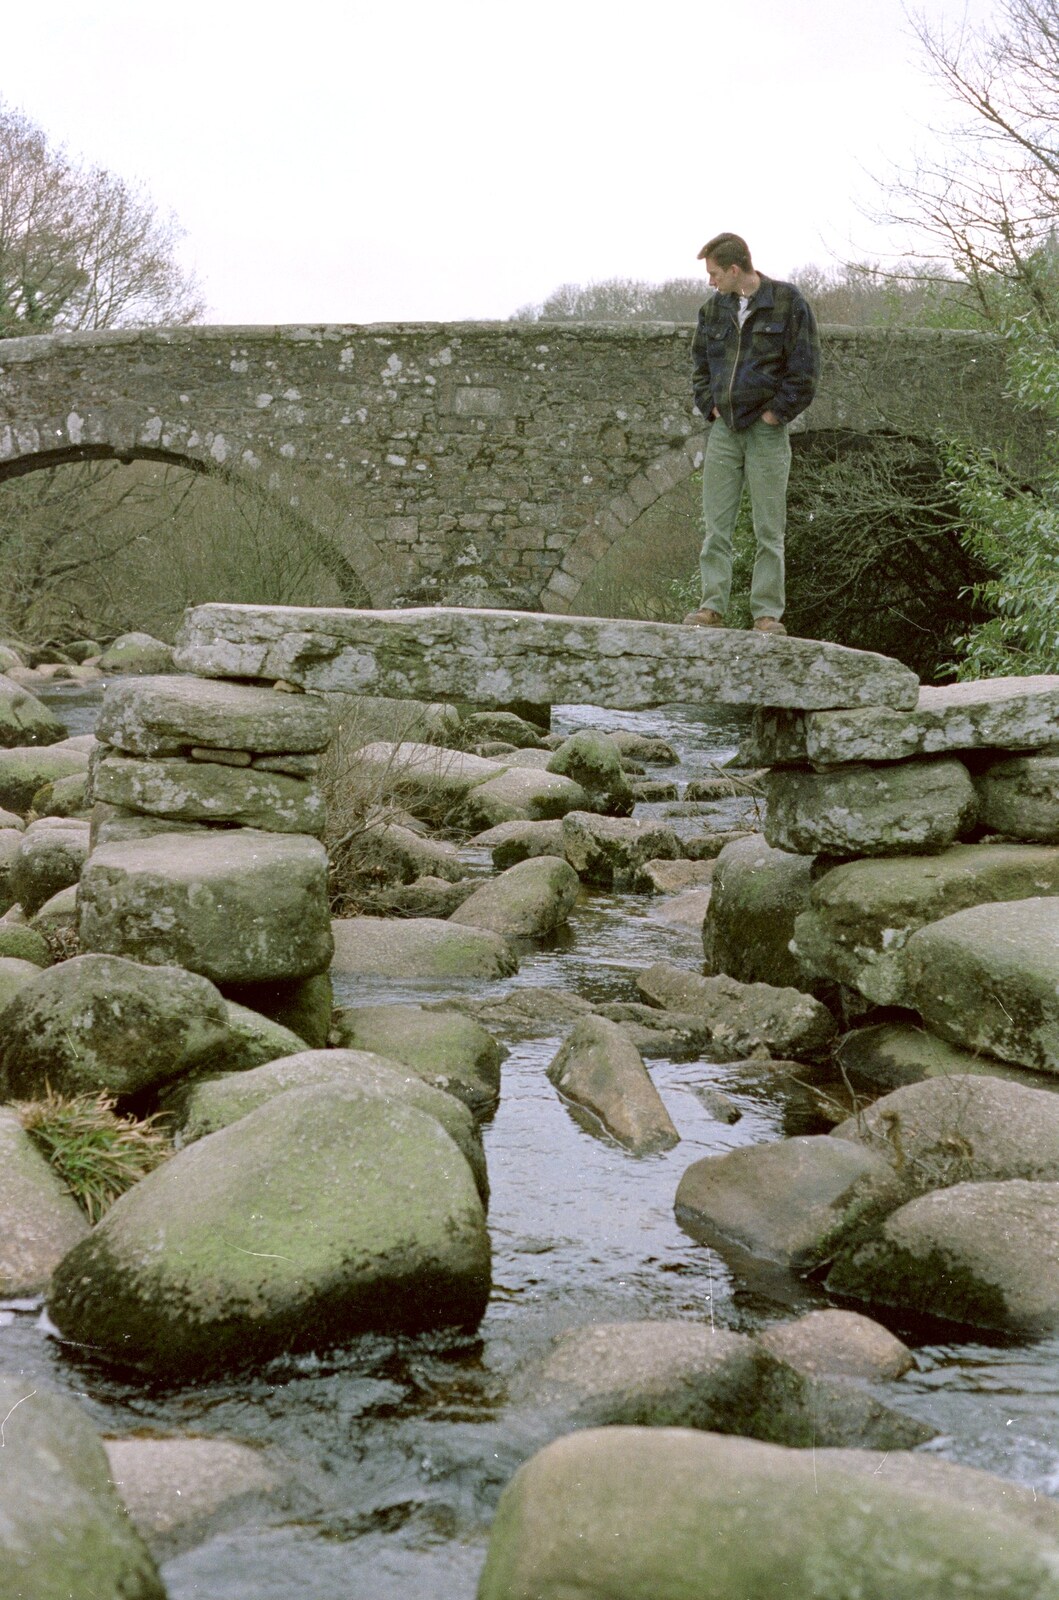 Andrew stands on the bridge at Badger's Holt from A CISU Trip to Plymouth, Devon - 1st May 1998